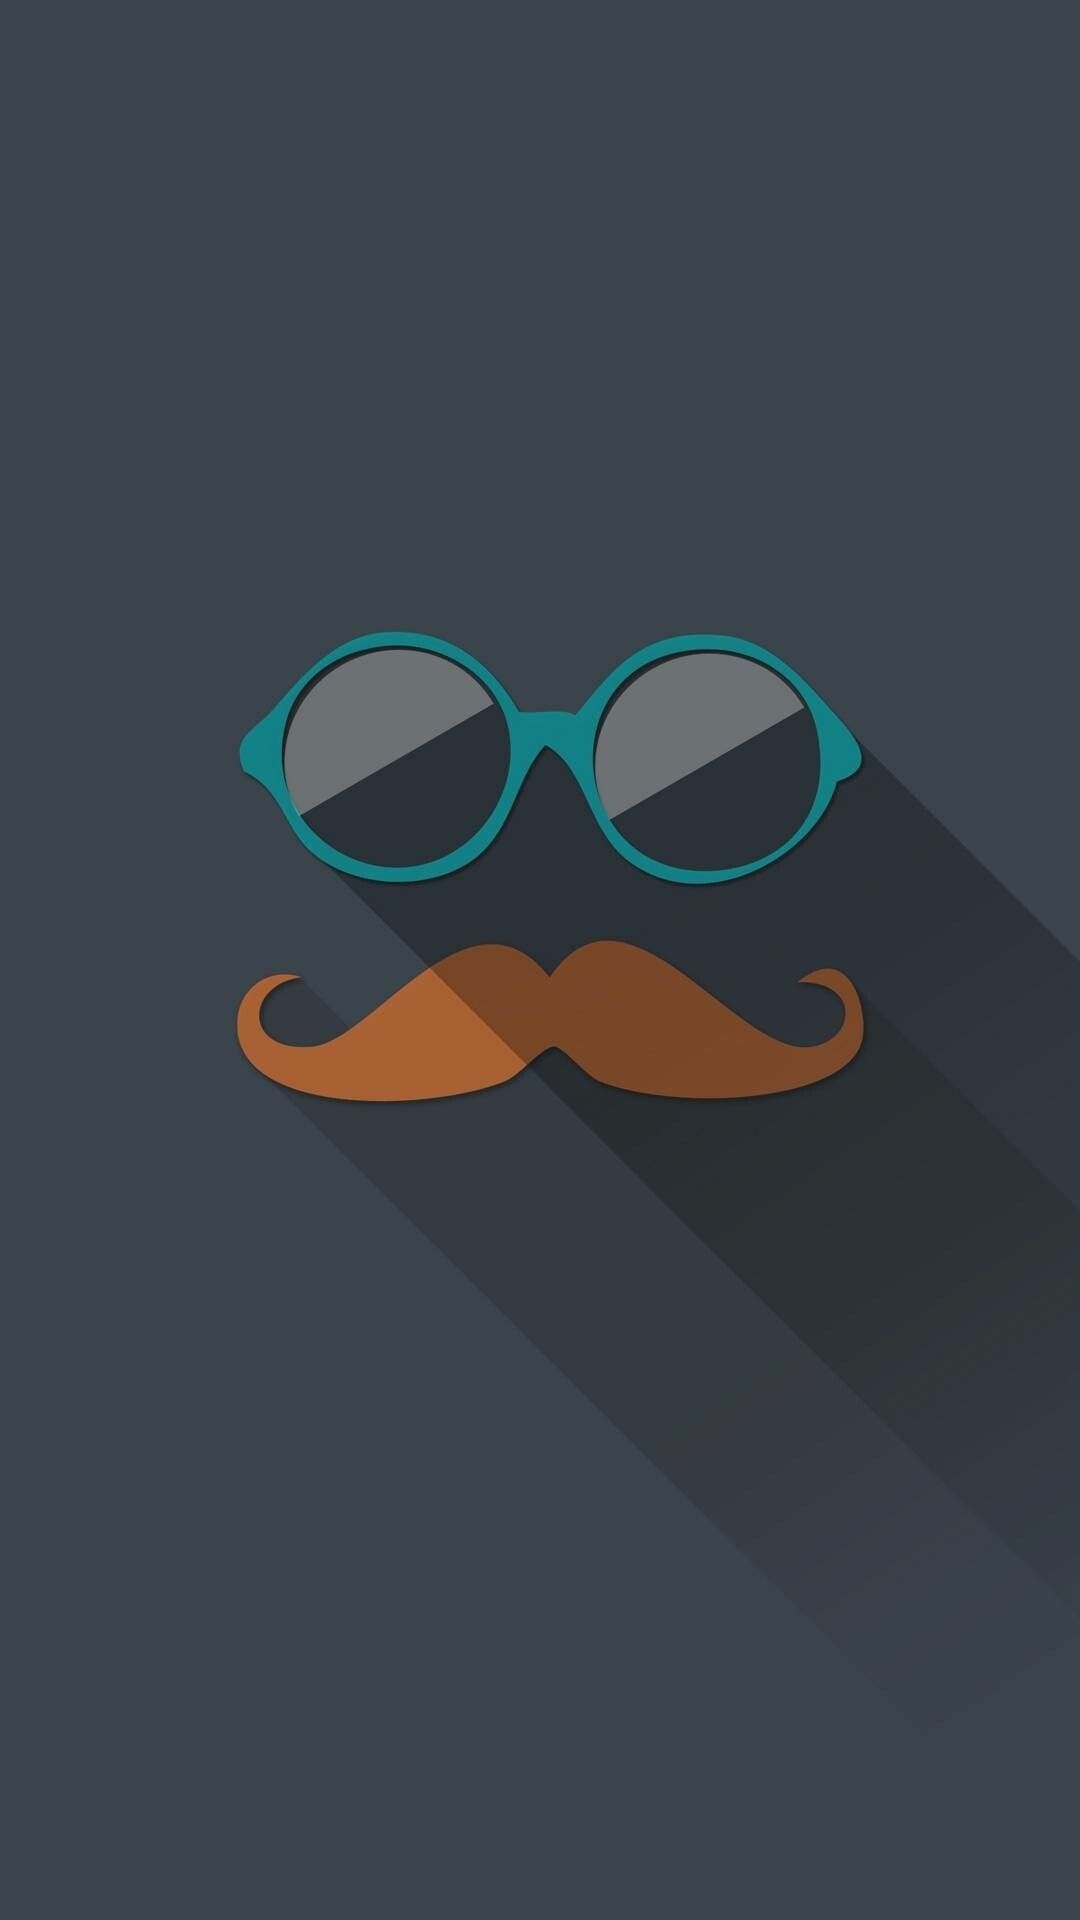 Galaxy Mustache, Mustache iPhone wallpapers, Popular backgrounds, Vibrant design, 1080x1920 Full HD Phone